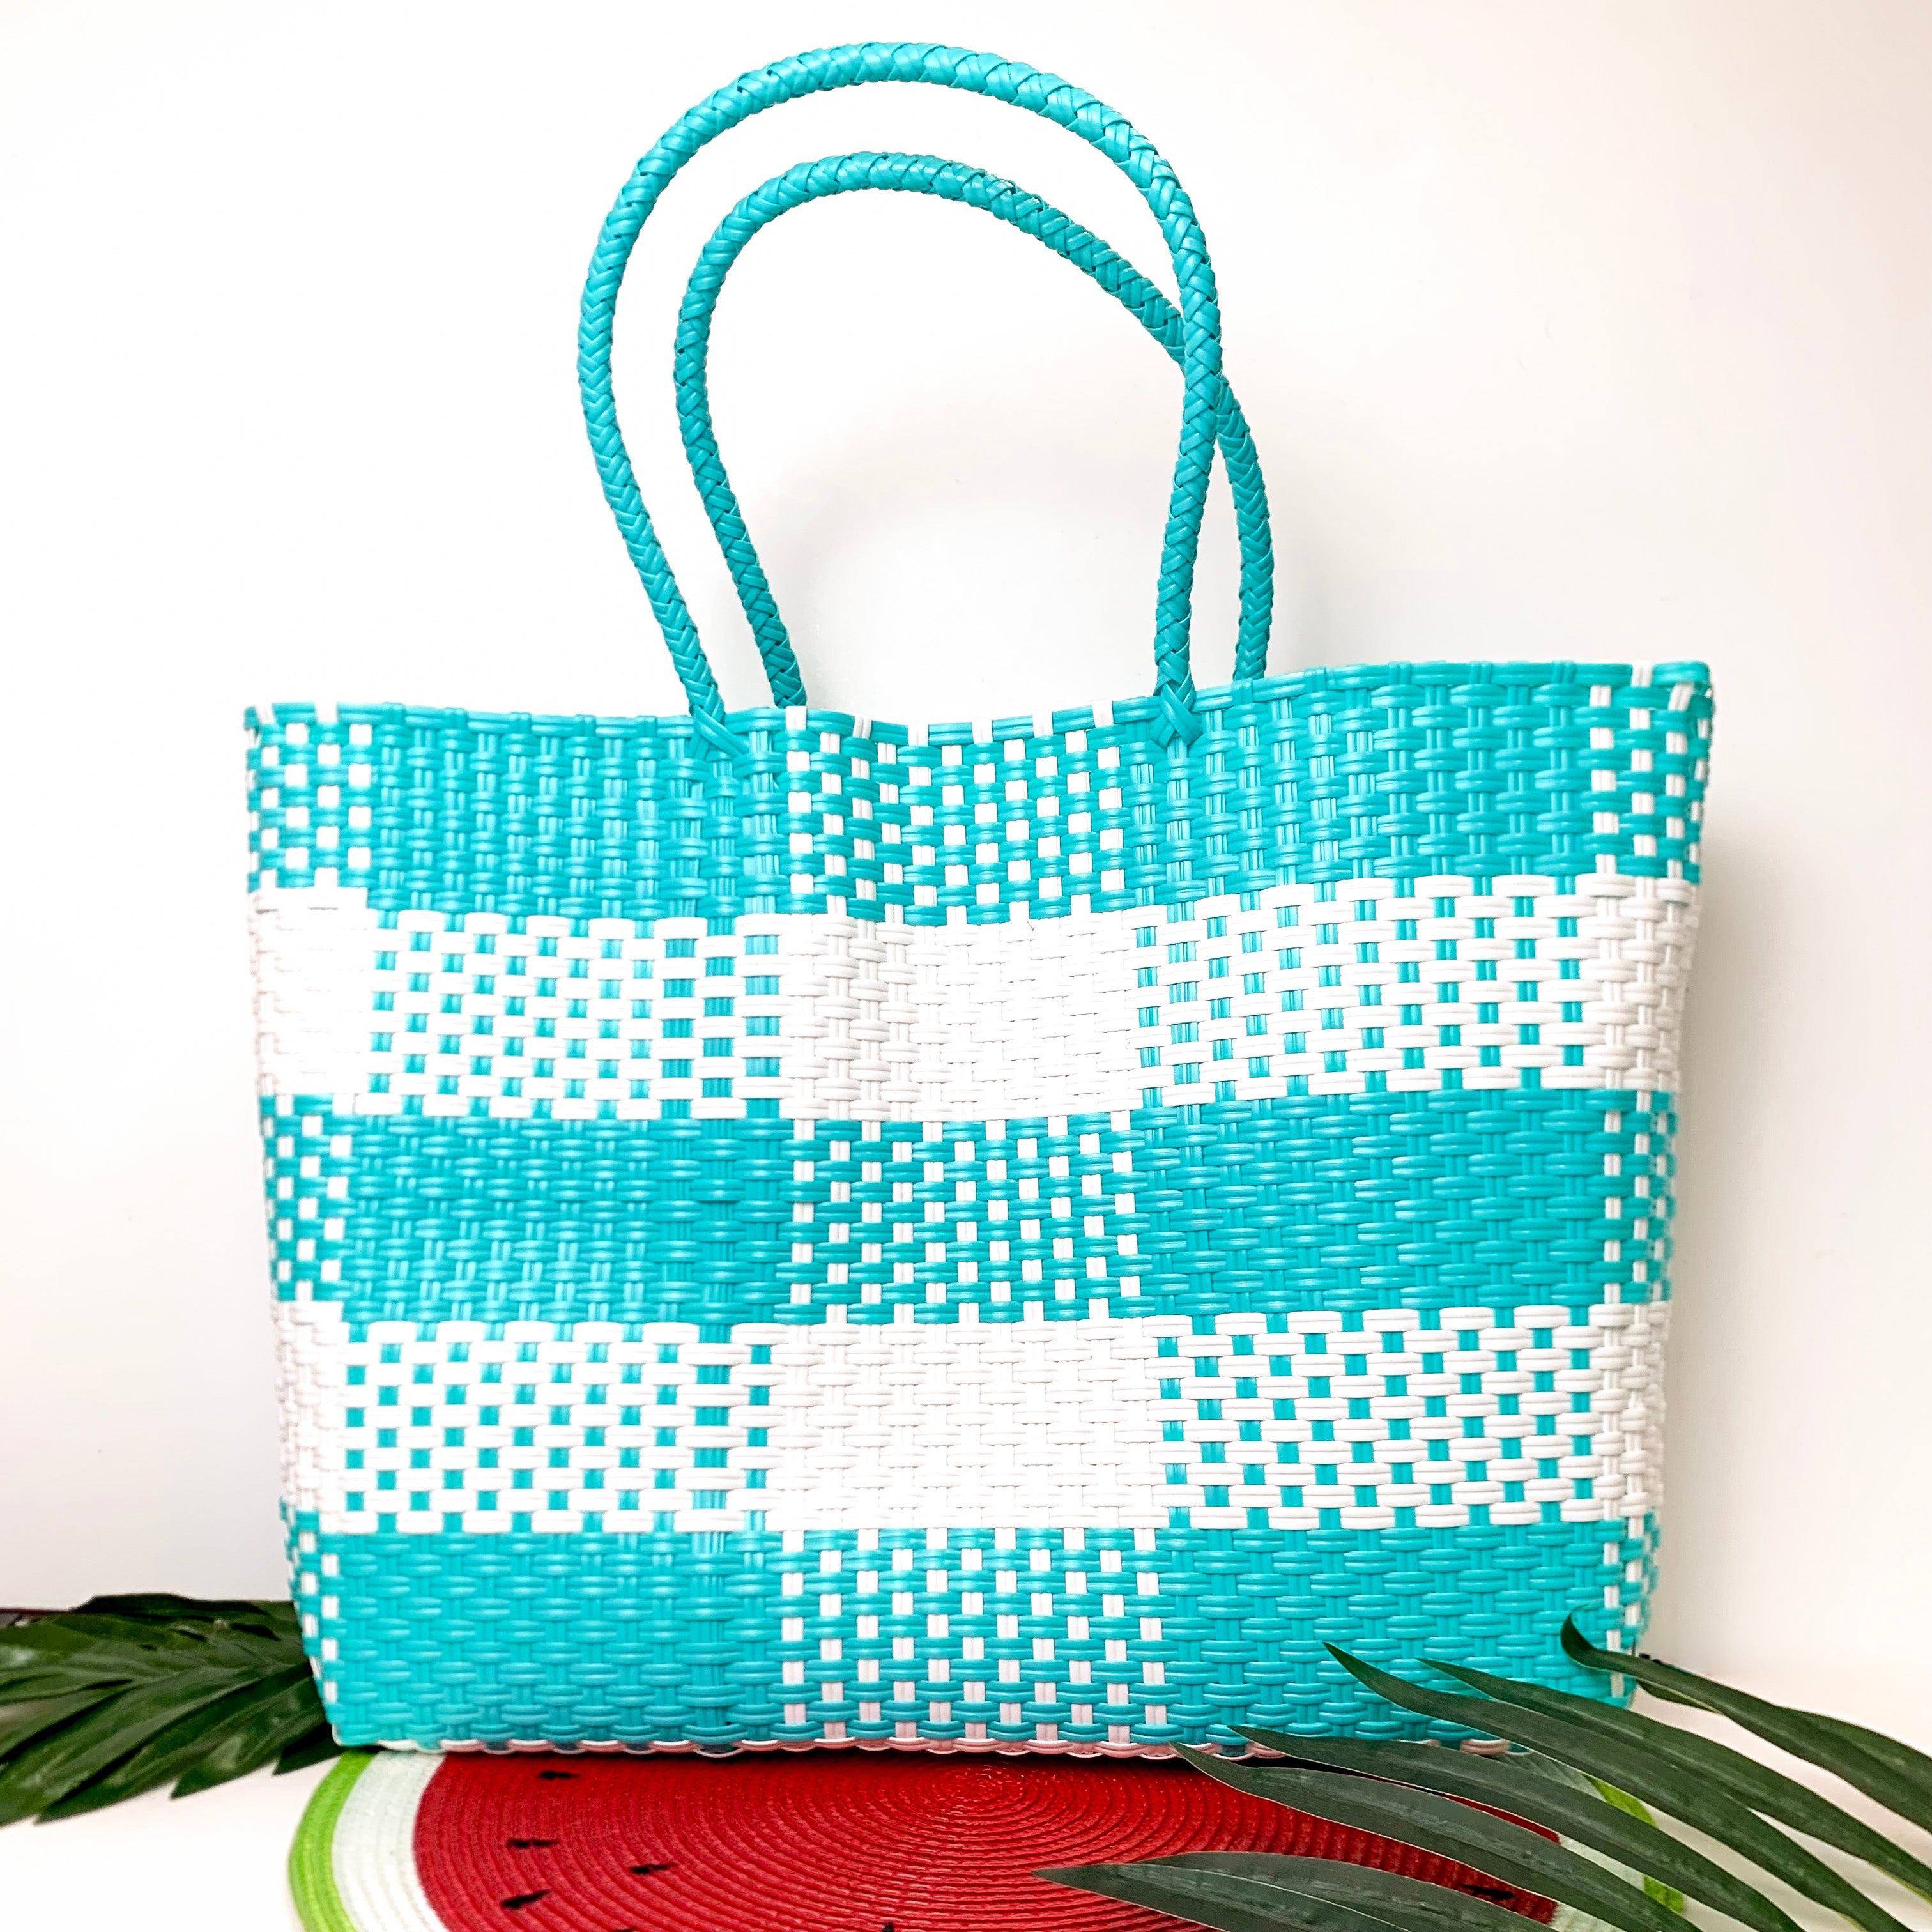 Garden Party Gingham Tote Bag in Turquoise Blue and White - Giddy Up Glamour Boutique